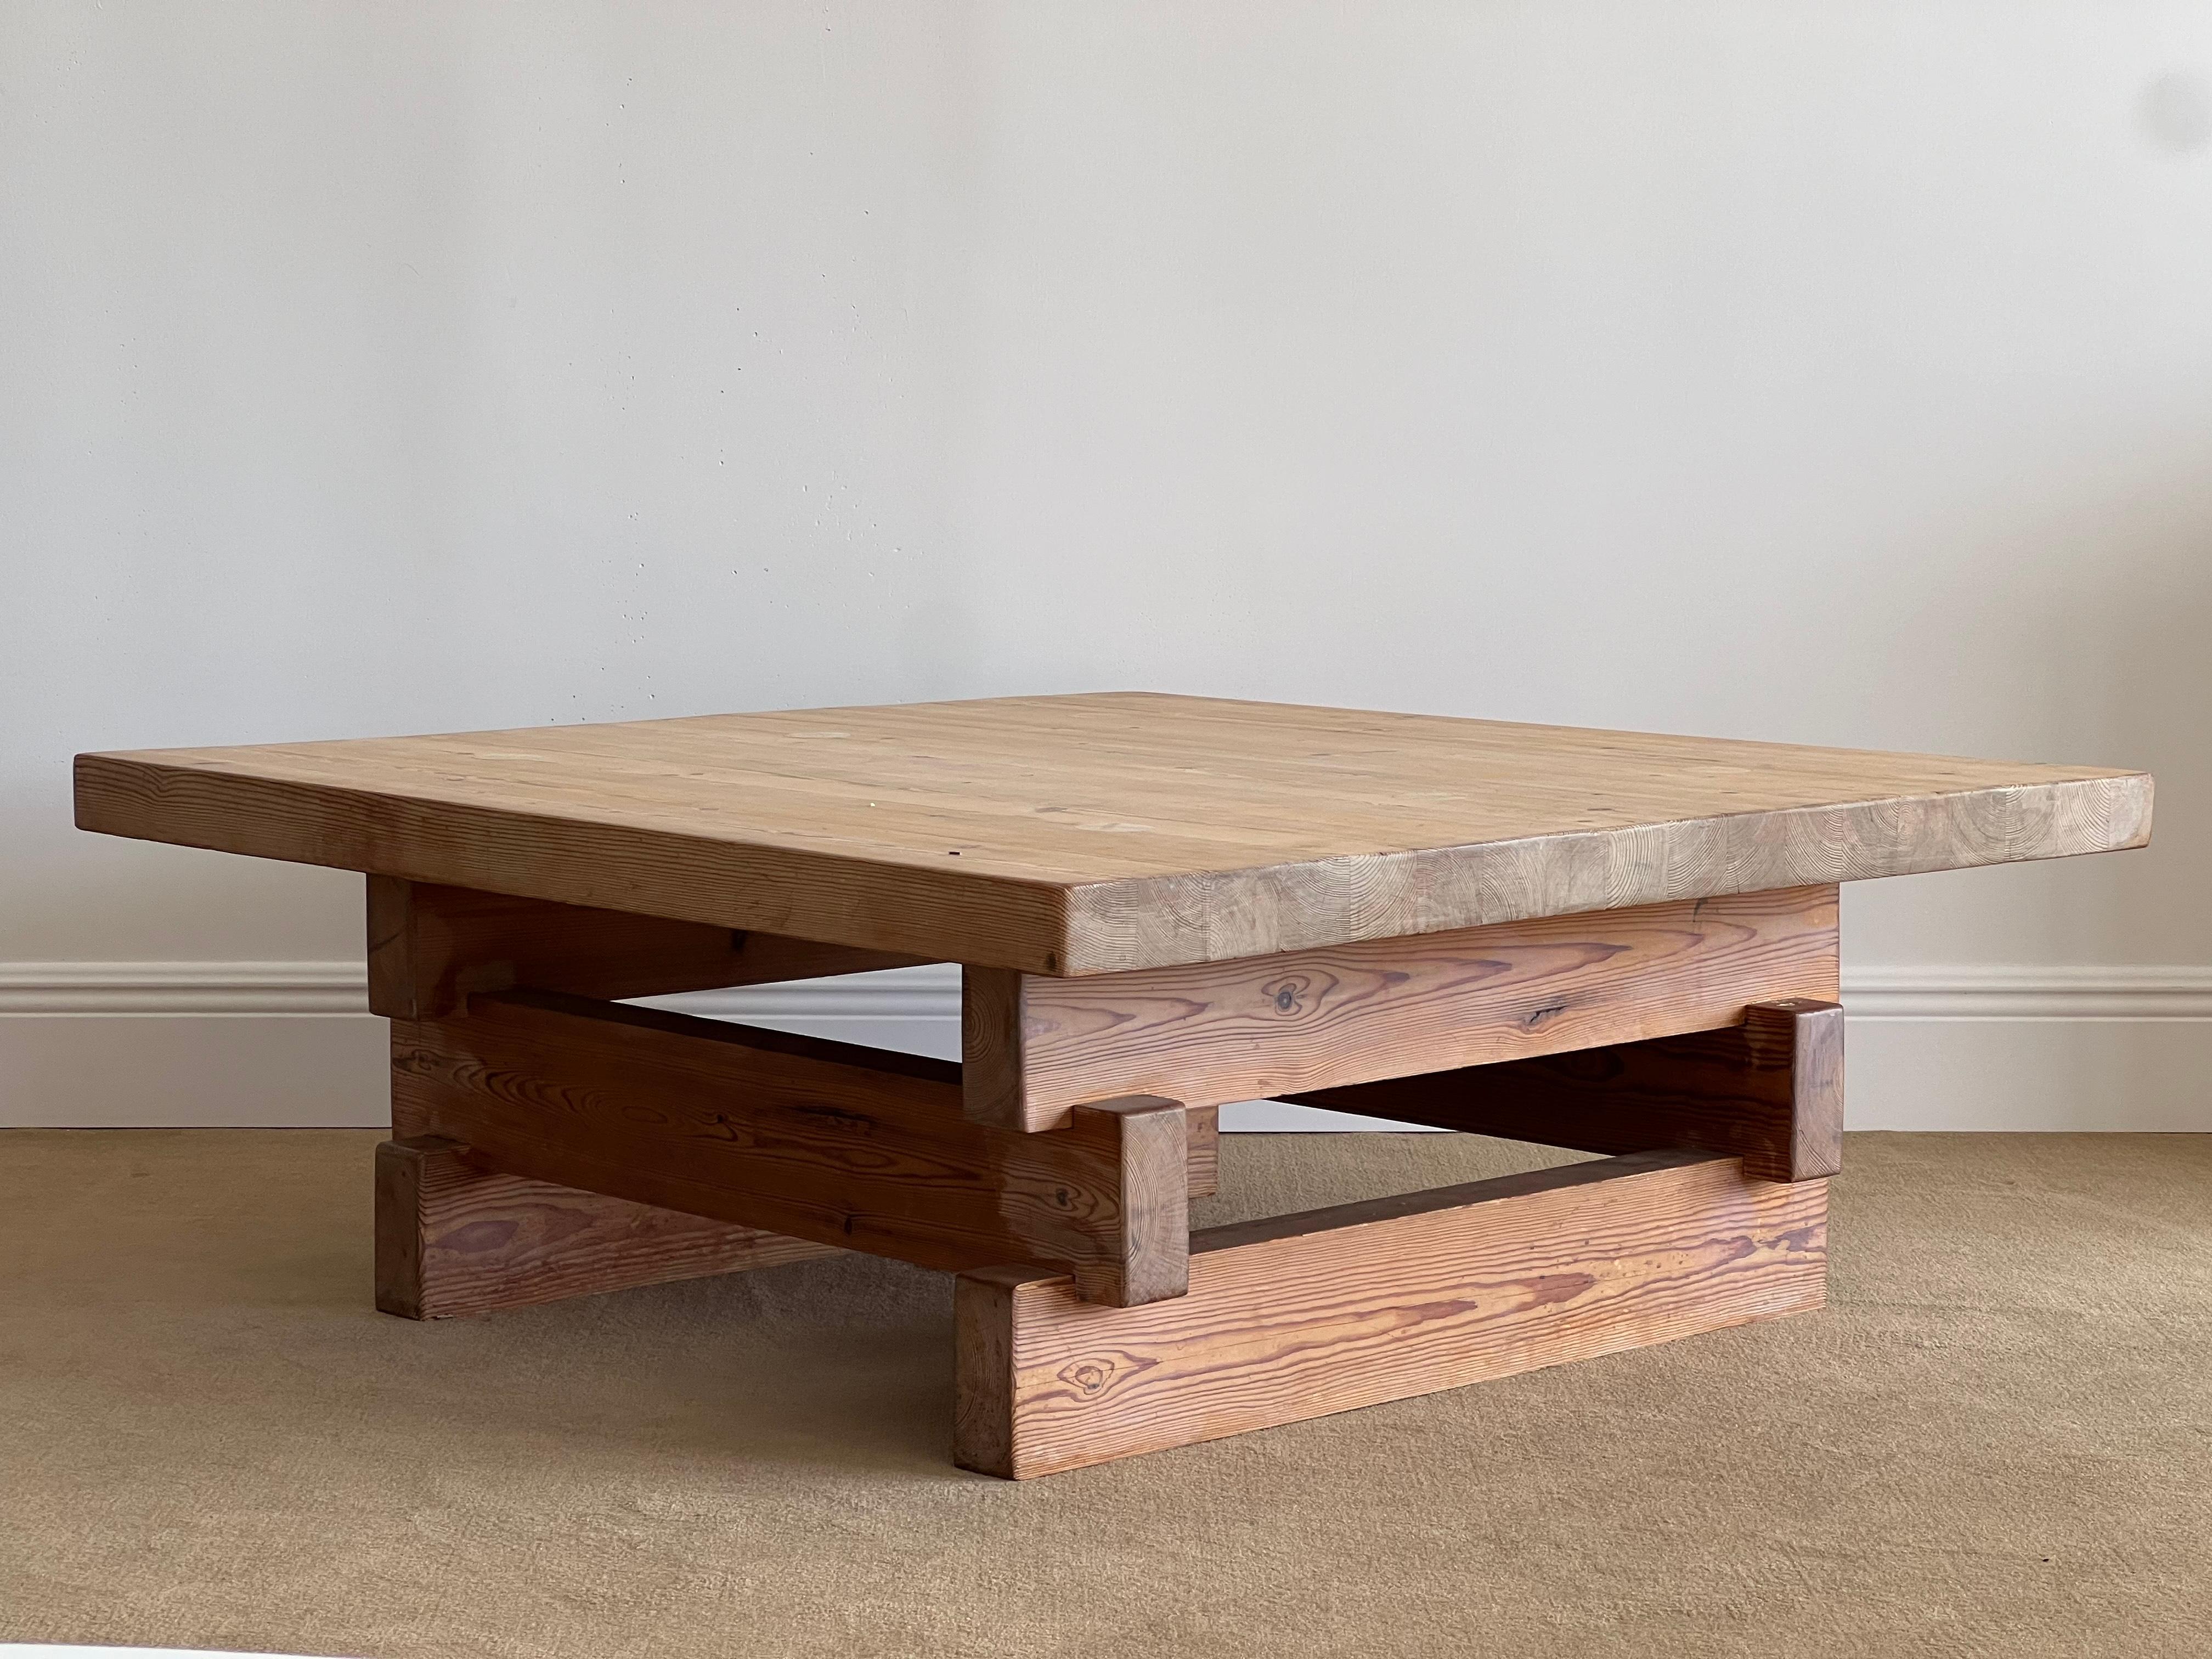 A large square pine coffee table designed and produced in Sweden, 1970s.